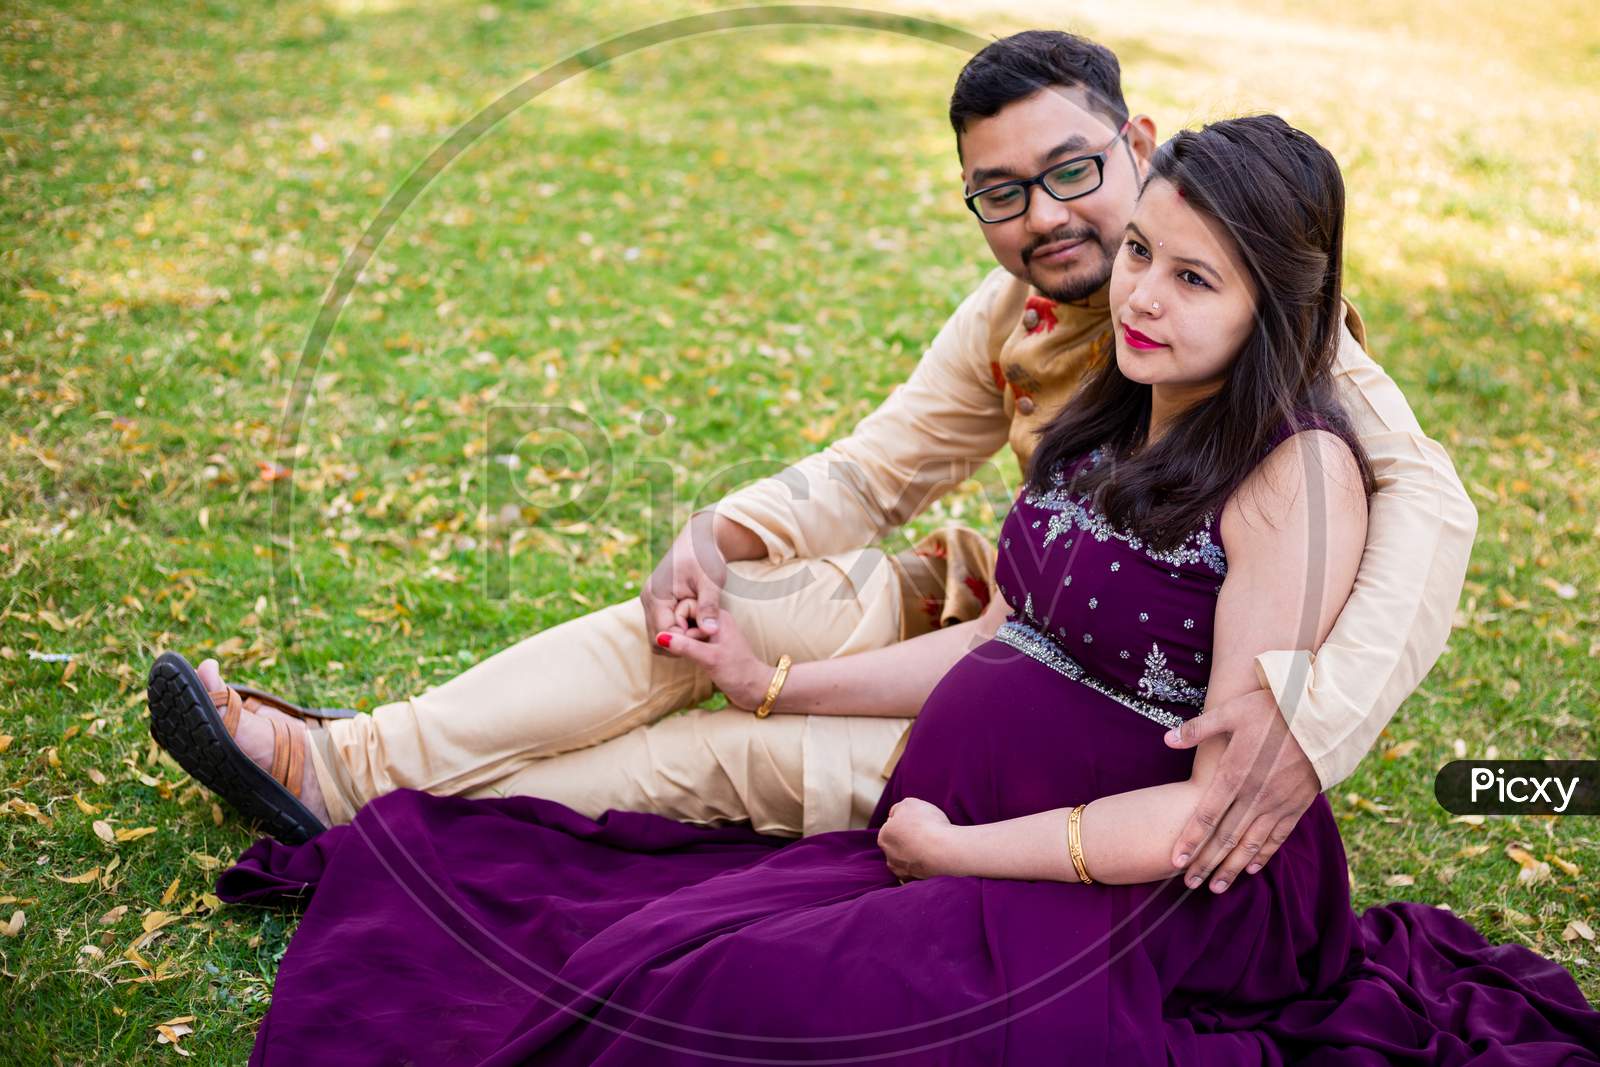 Young Asian Indian Pregnant Woman With Her Husband In Sitting Relaxing In Park Or Garden, Young Parents Looking At Camera Expecting Baby.